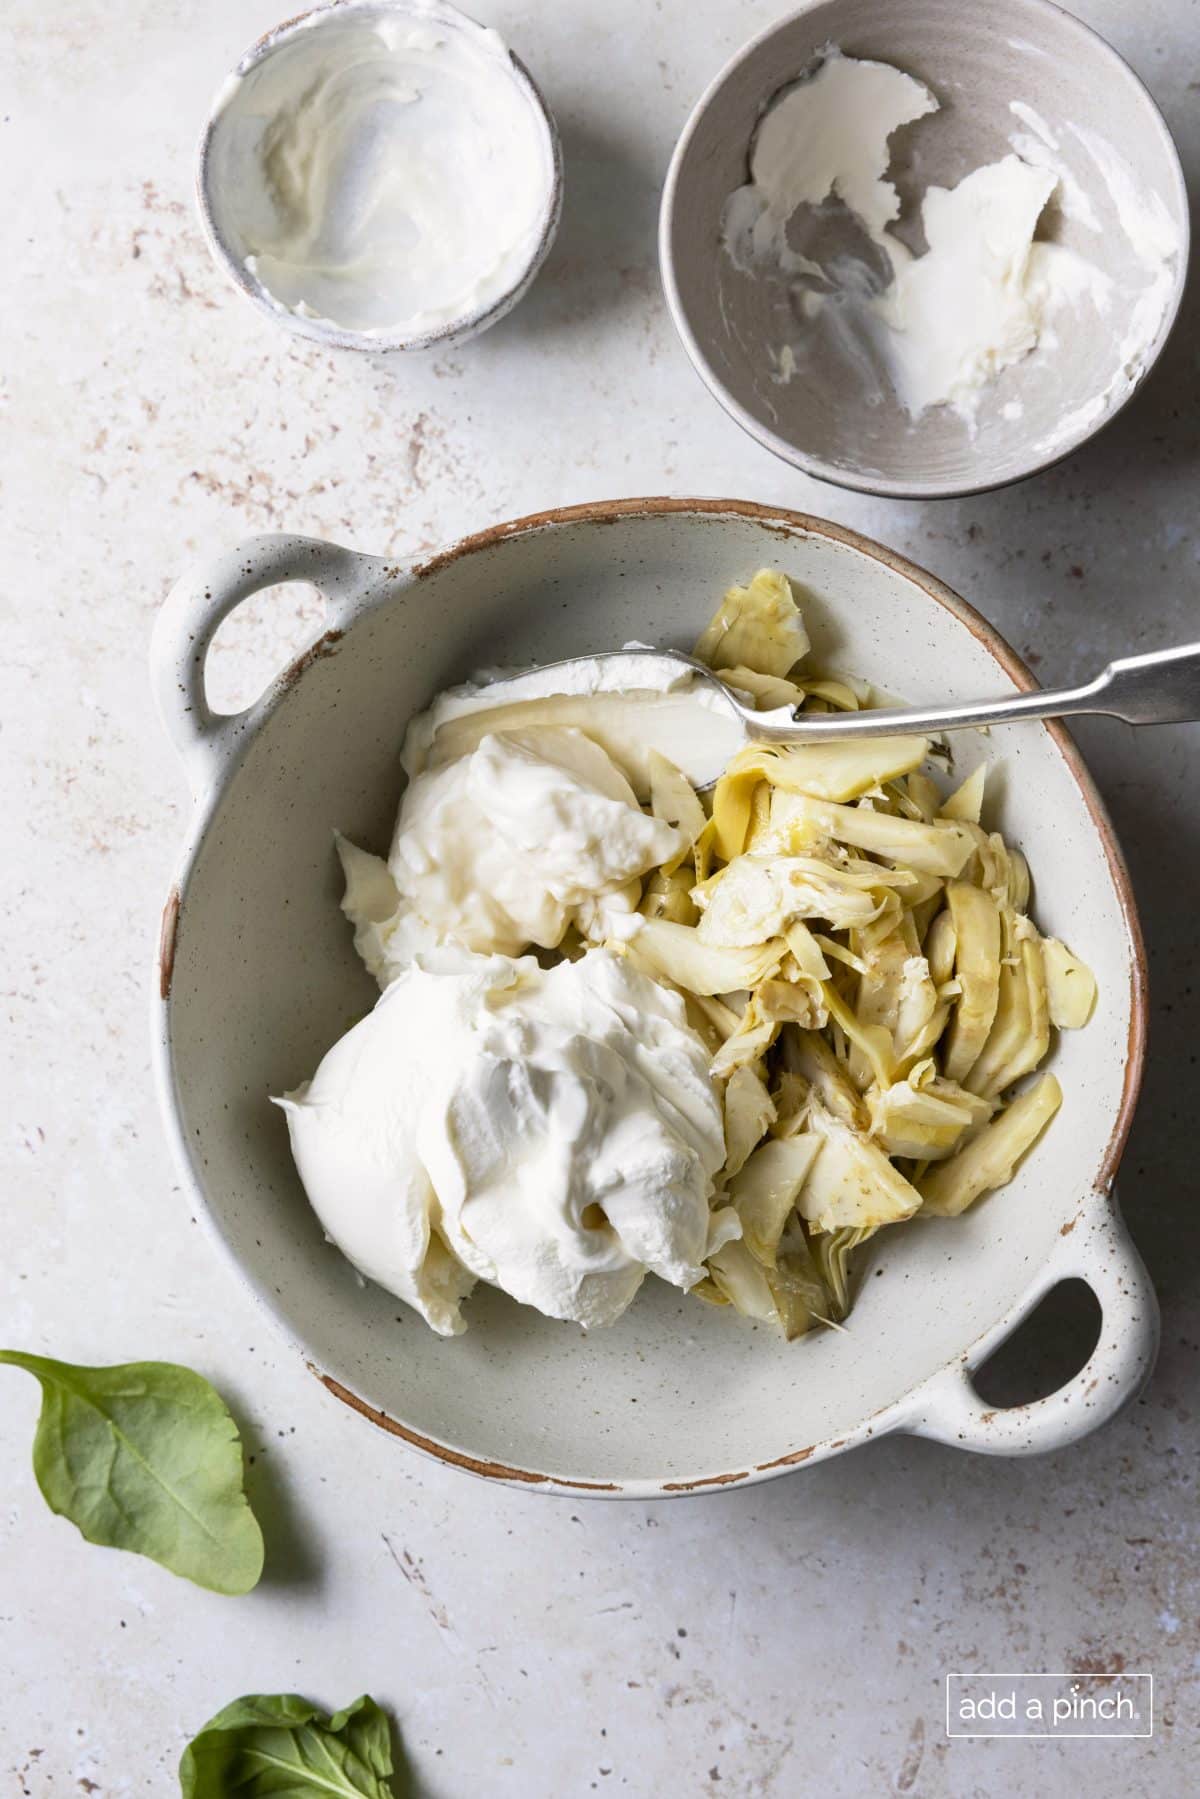 Photograph of artichoke hearts and the creamy ingredients for the dip recipe.